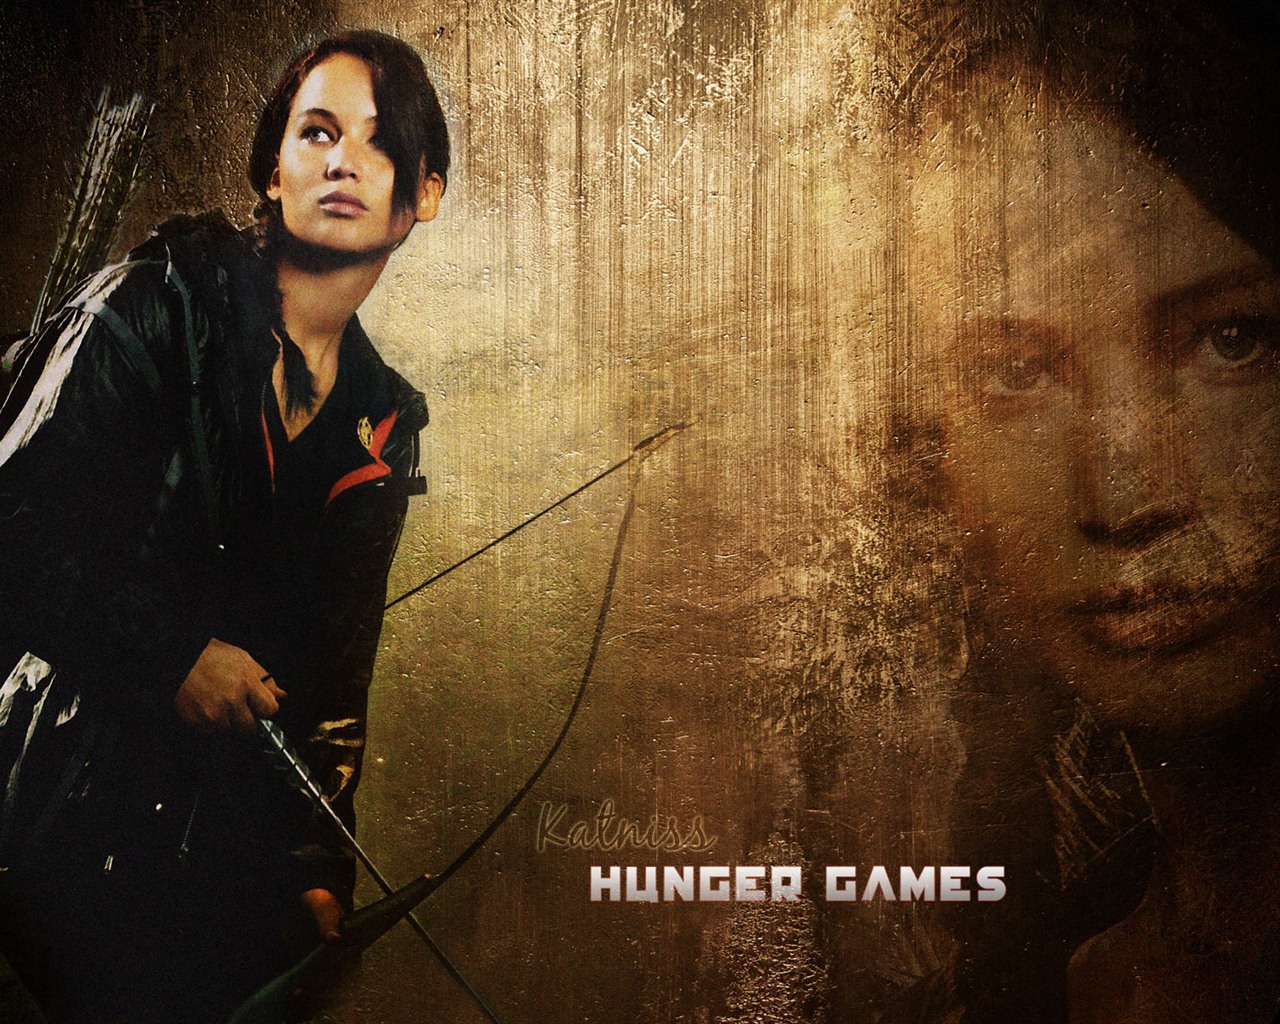 The Hunger Games HD wallpapers #8 - 1280x1024